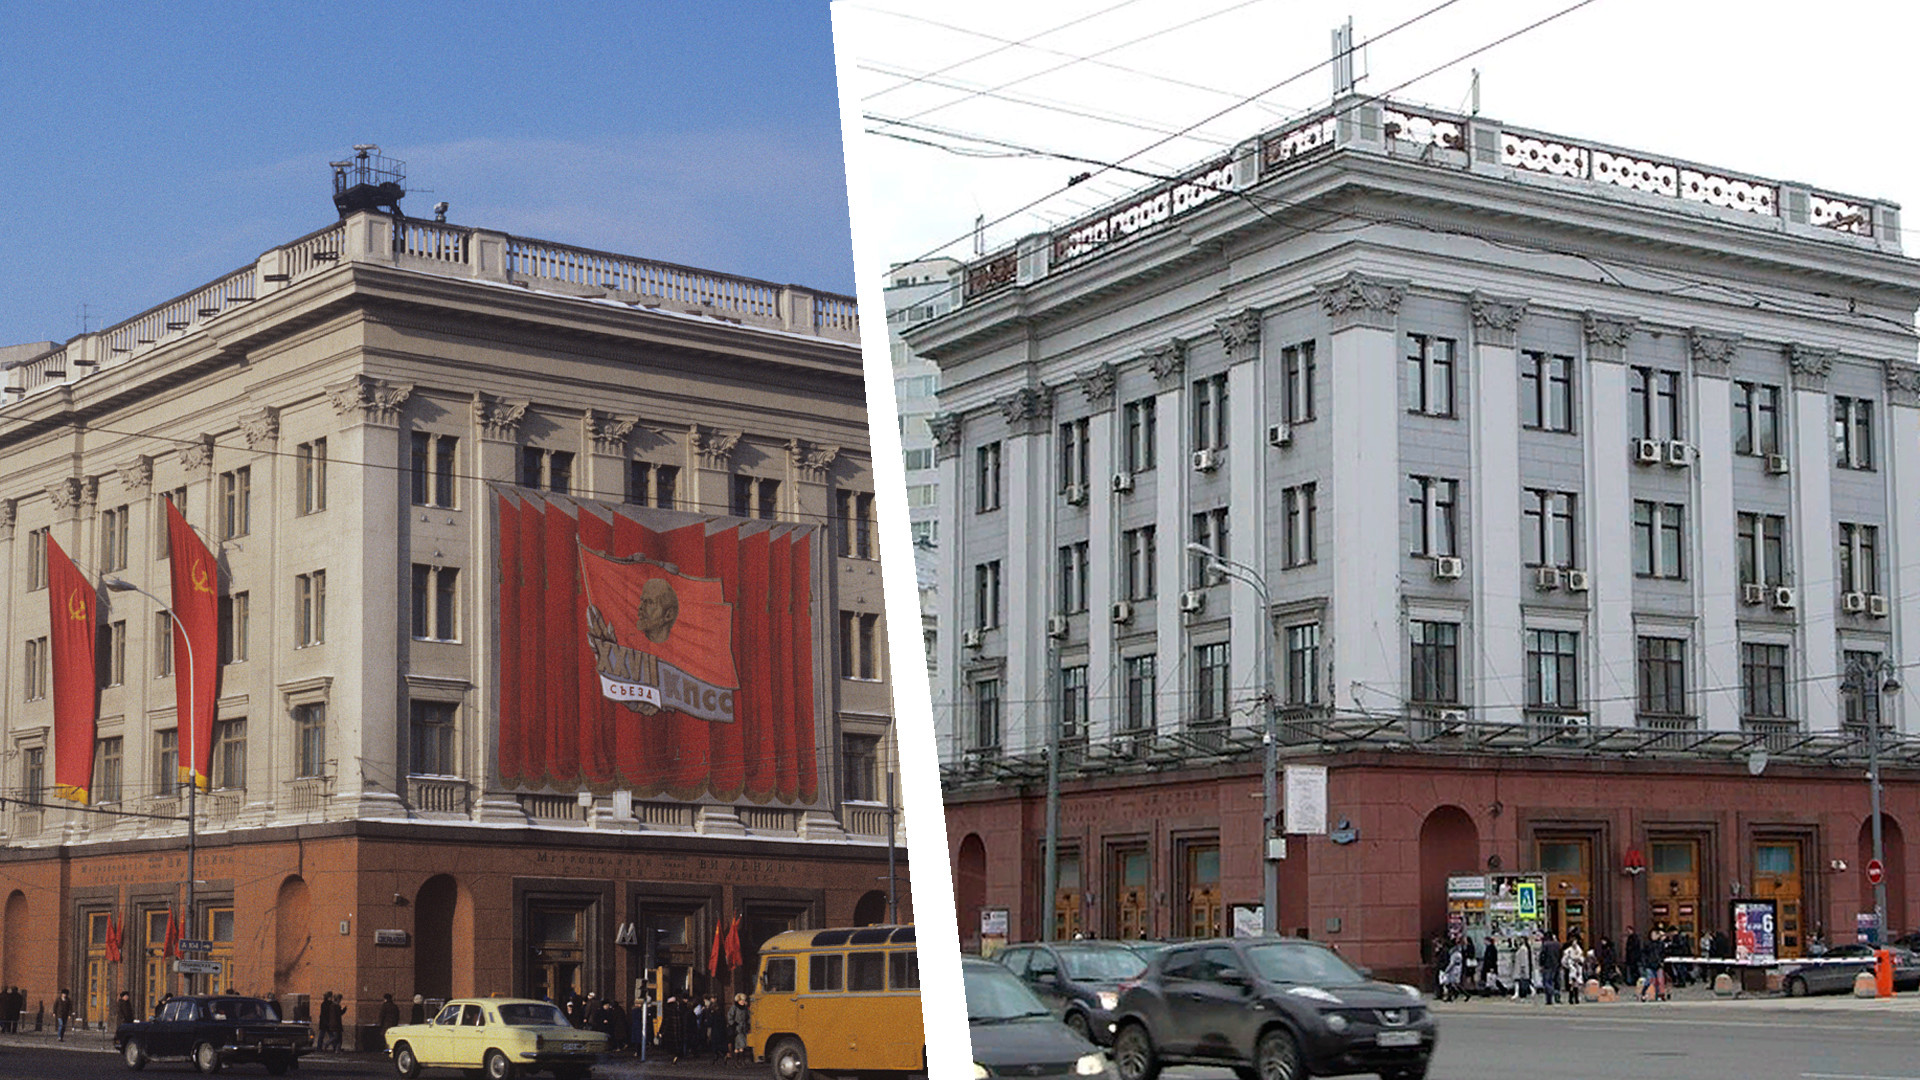 Okhotny Ryad station in Soviet times and today.